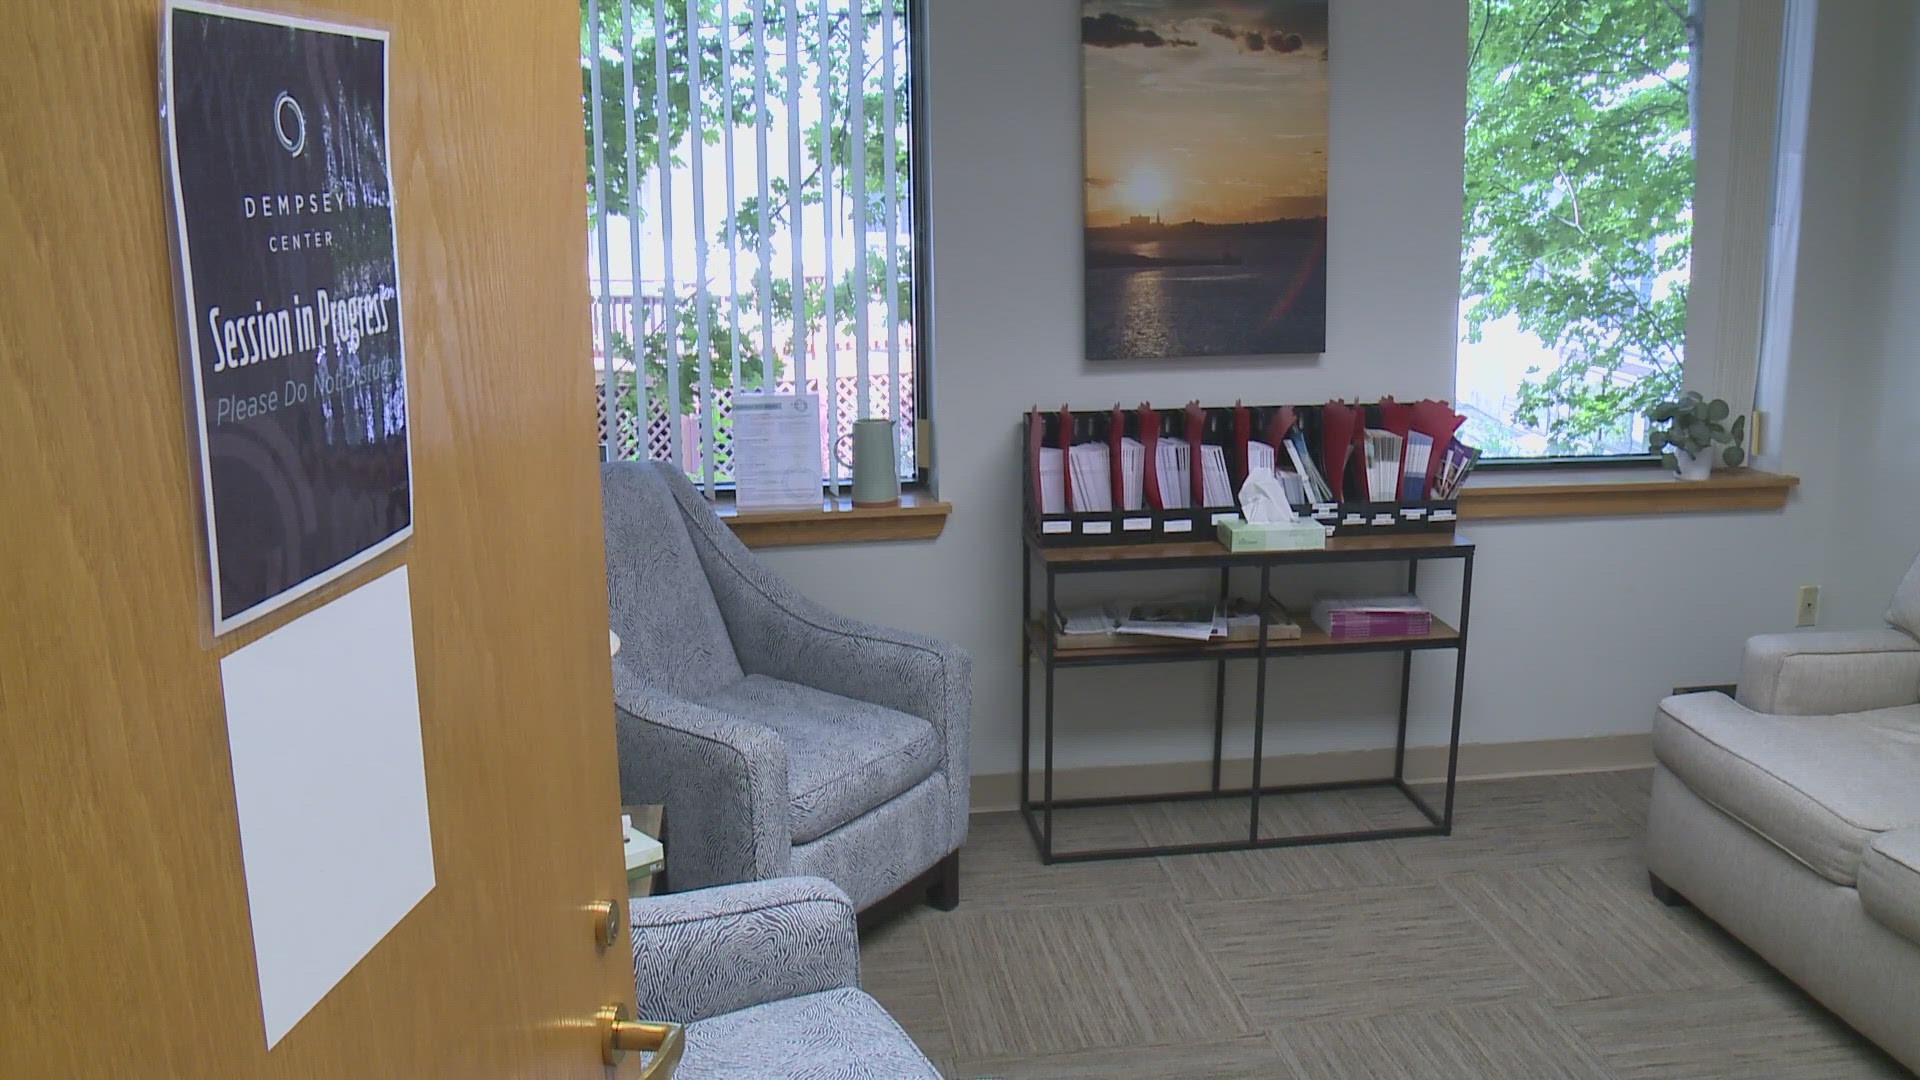 Dempsey Center Marketing and Communications Director Katelynn Davis said they saw a more than 50 percent increase in people utilizing their services in one year.